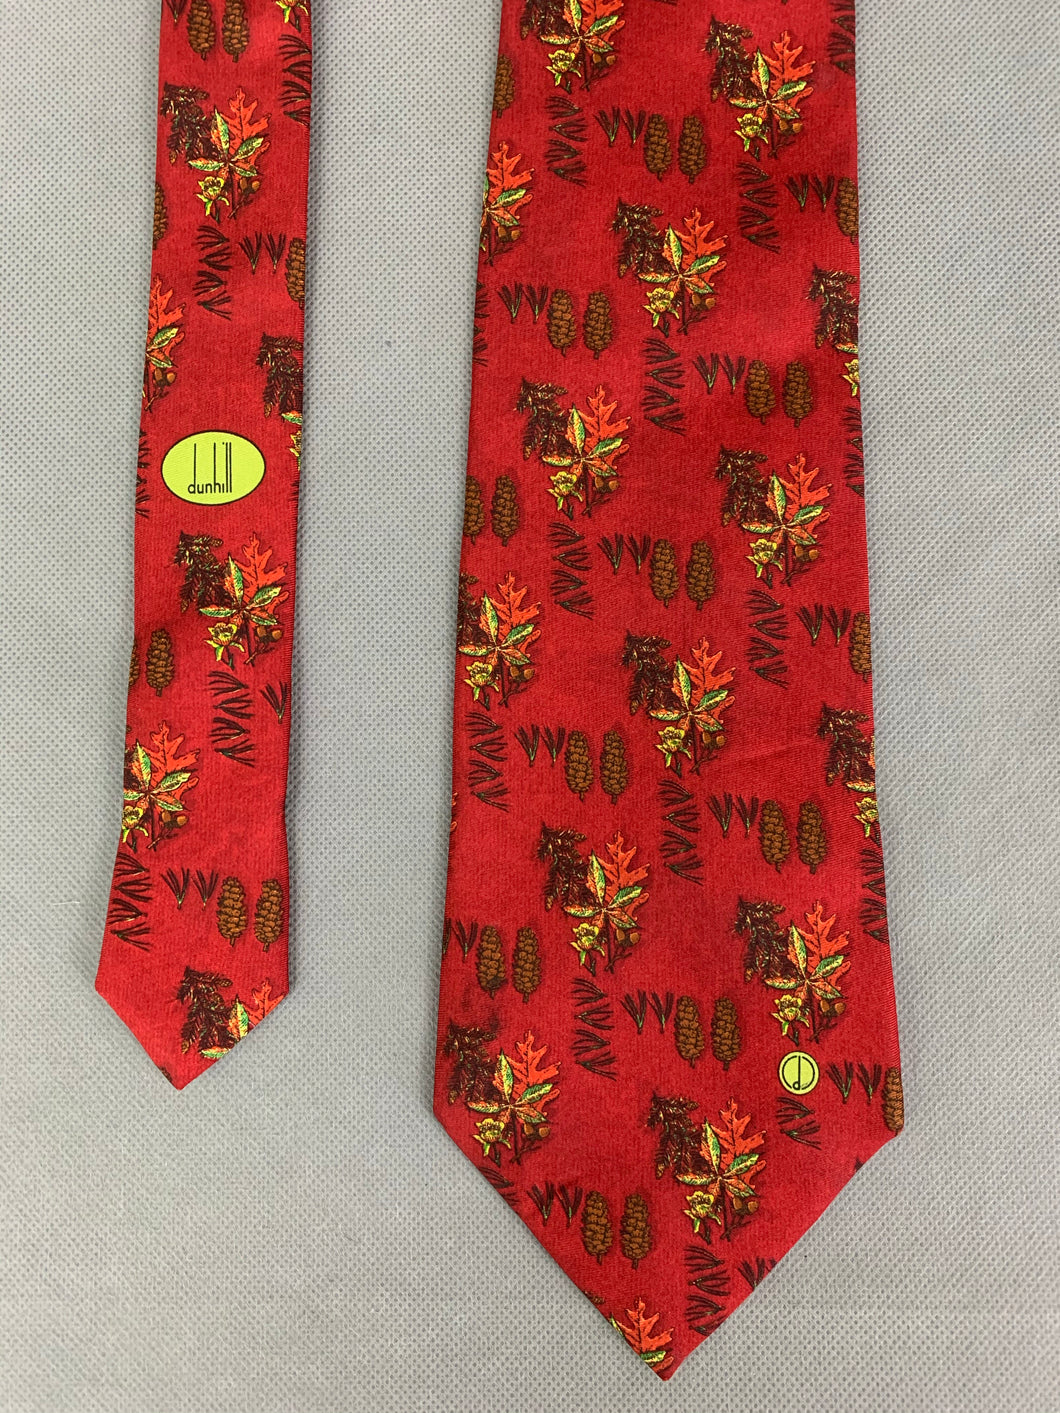 DUNHILL Mens 100% SILK Forest Themed TIE - Made in Italy